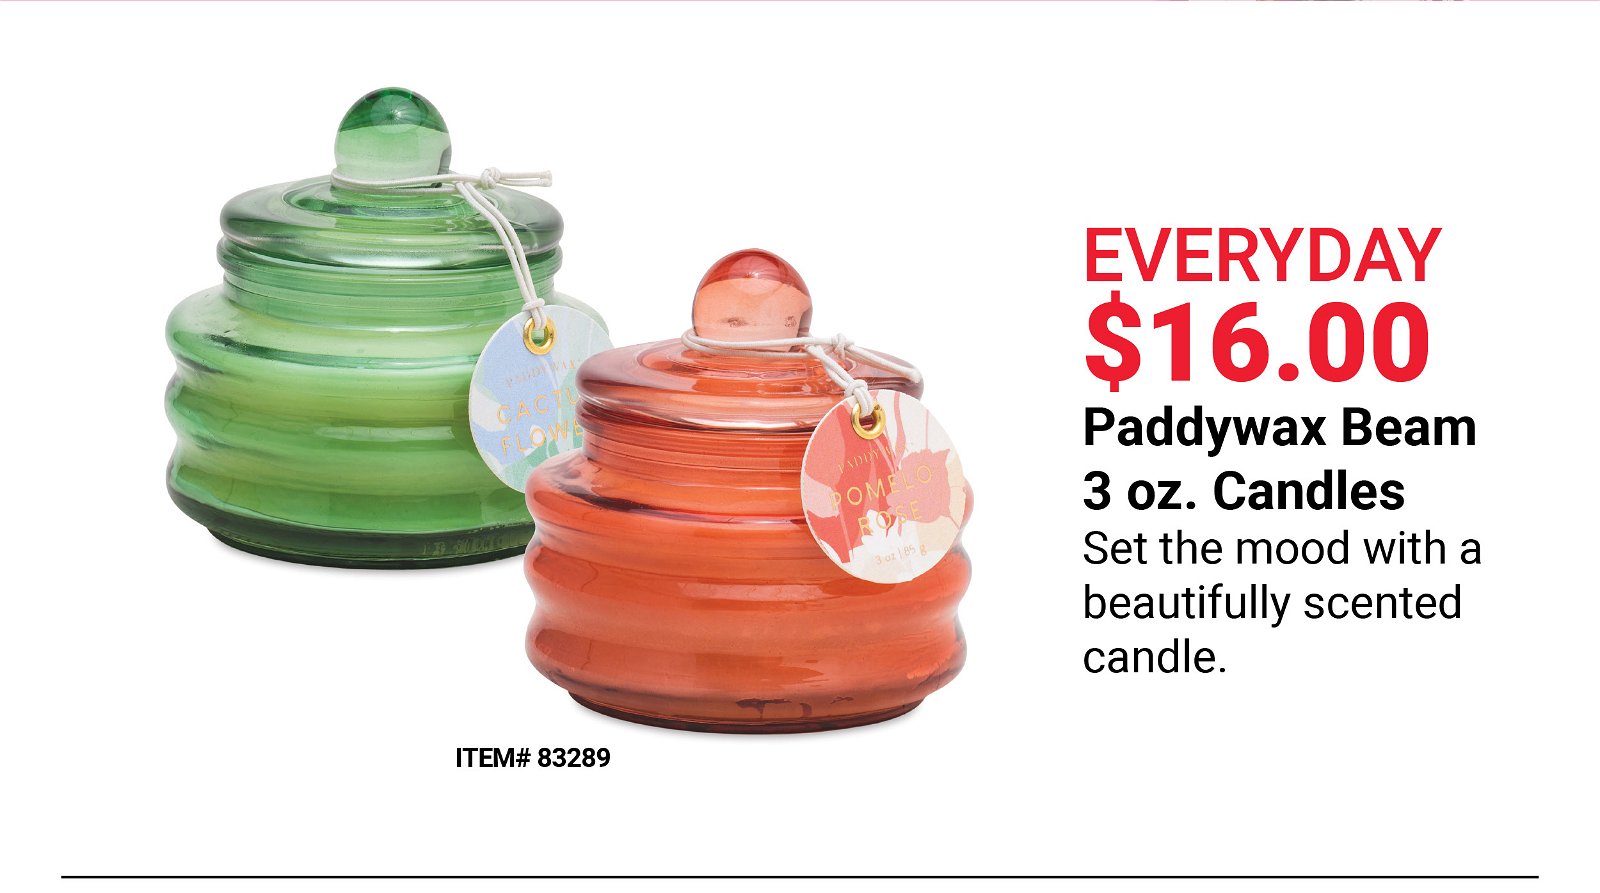 Everyday \\$16.00 Paddywax Beam 3 oz. Candles